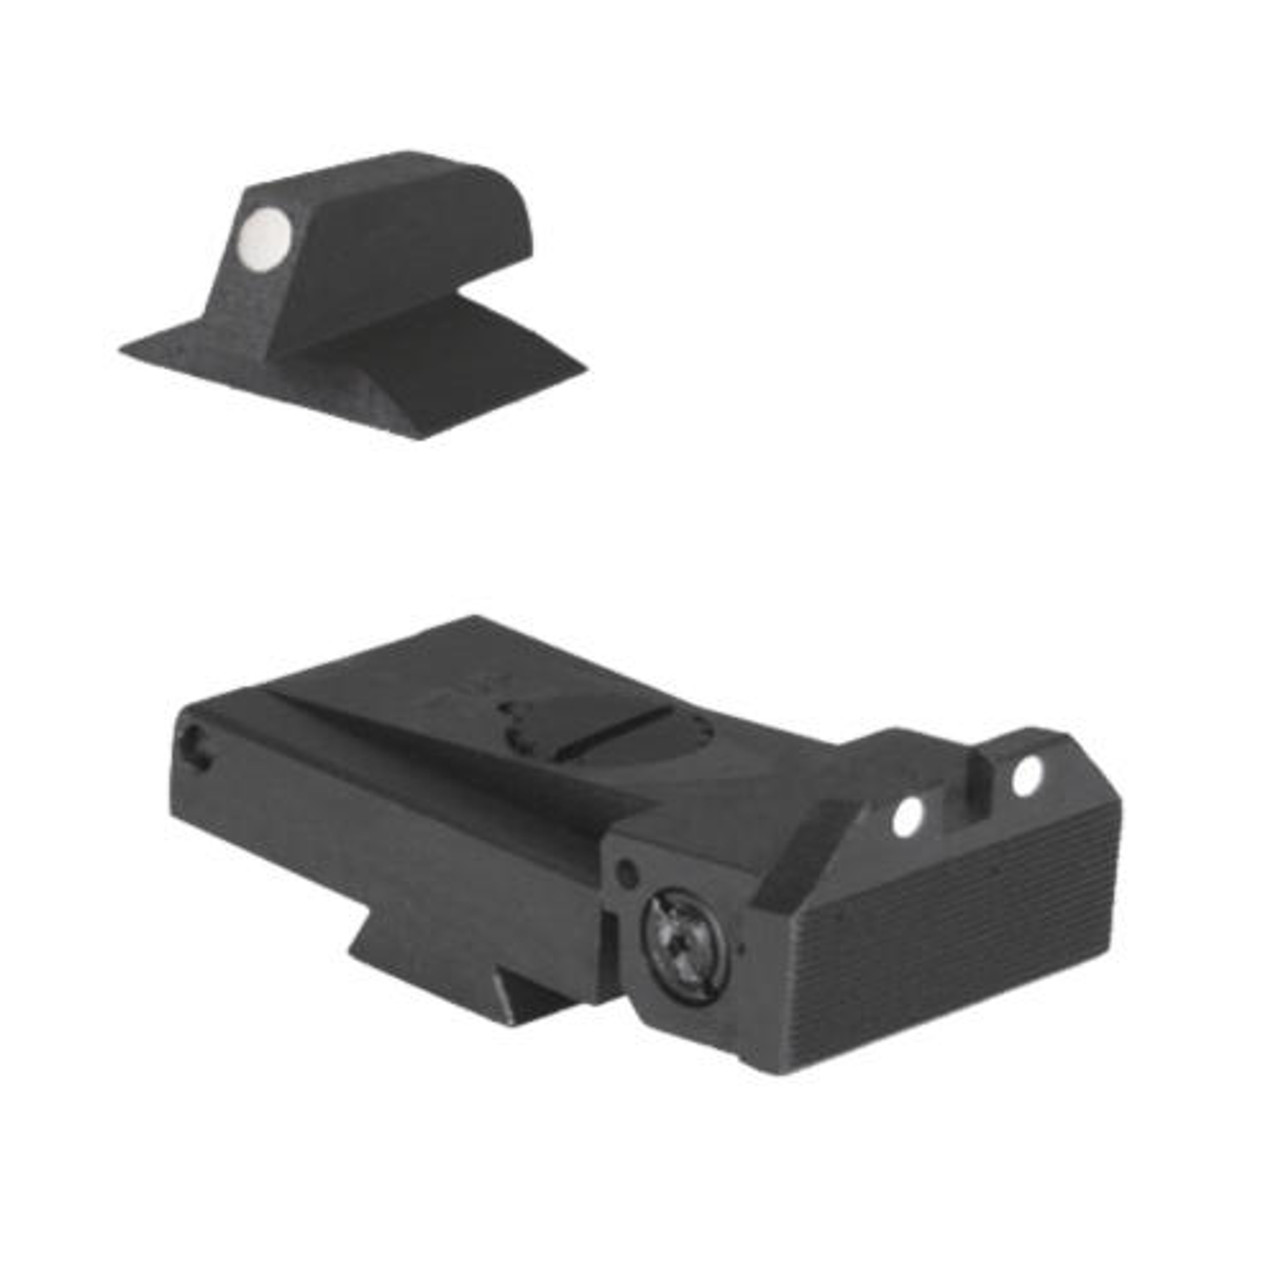 Kensight Kensight Target 1911 Sights White Dot Rear Sight with Beveled Blade - Fits LPA TRT  Sight Dovetail Cut